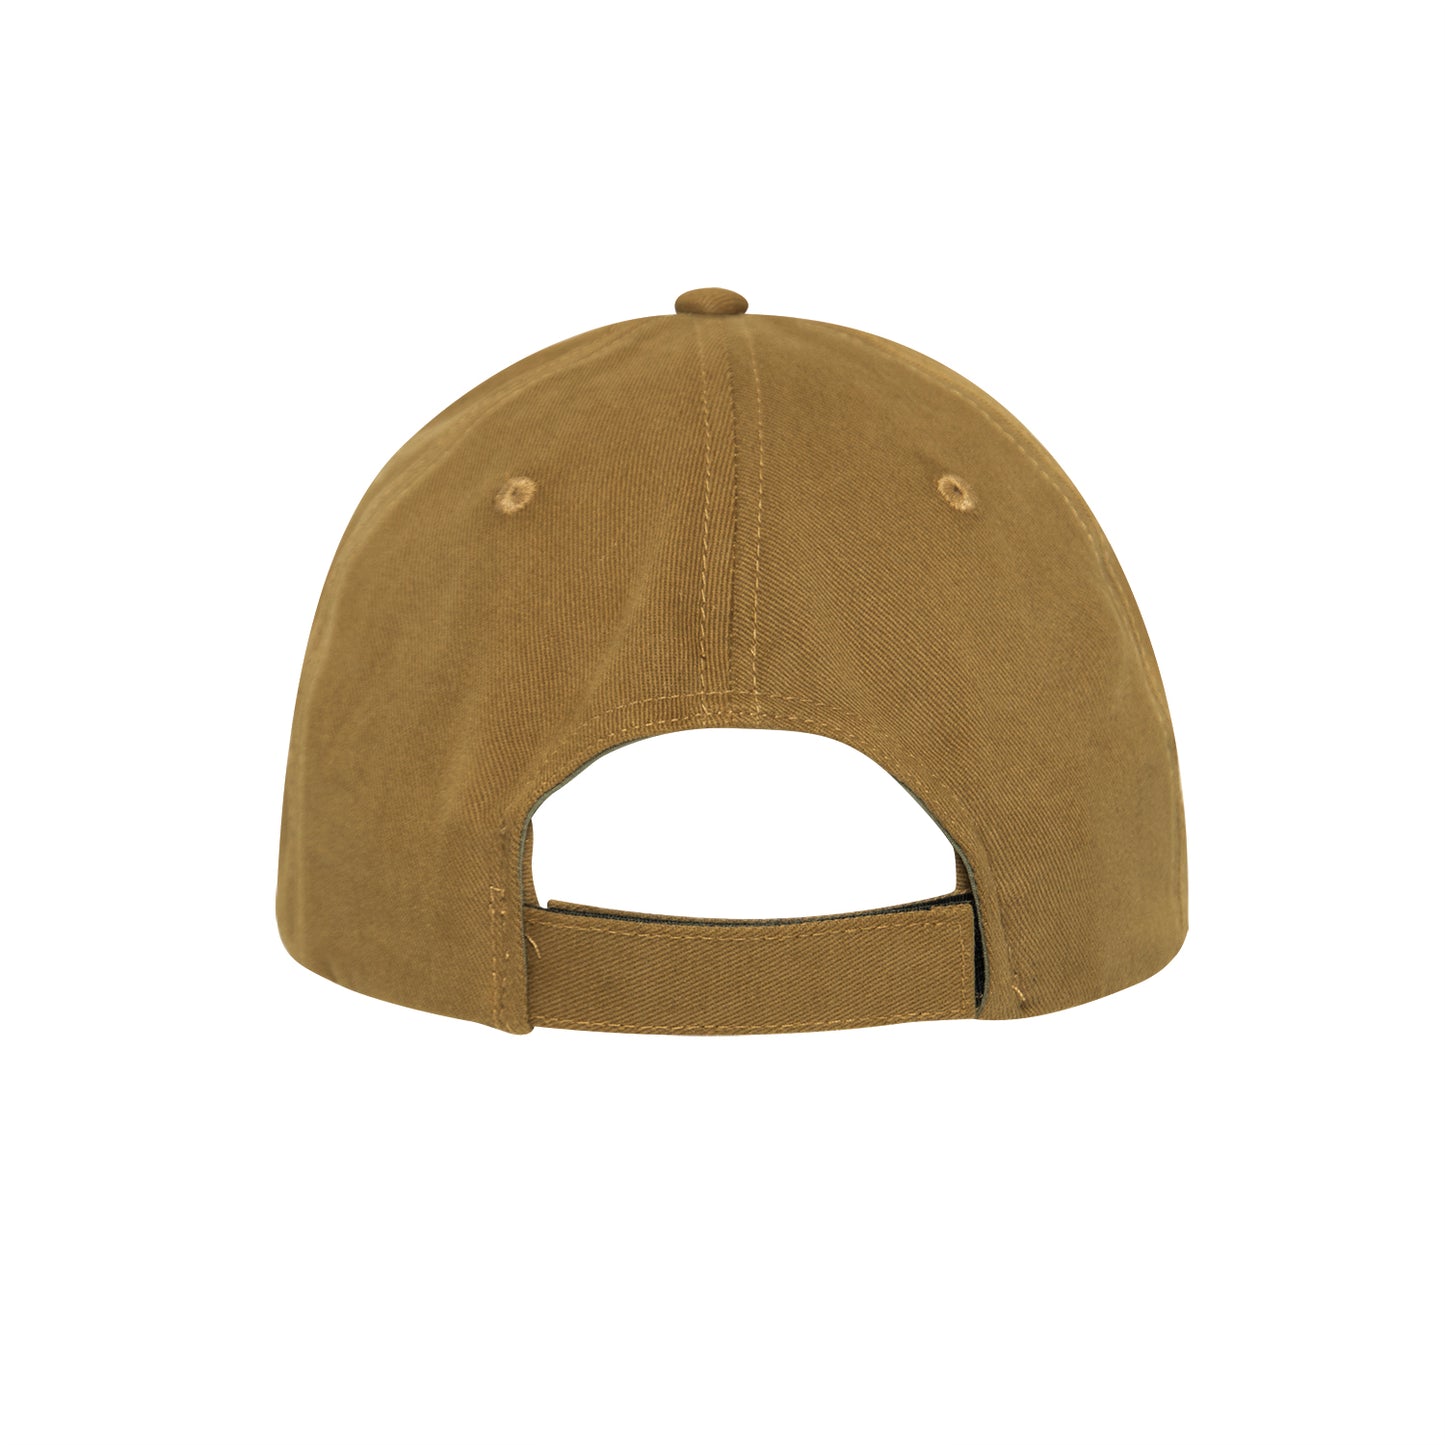 Rothco Deluxe Vintage USMC Embroidered Low Profile Cap